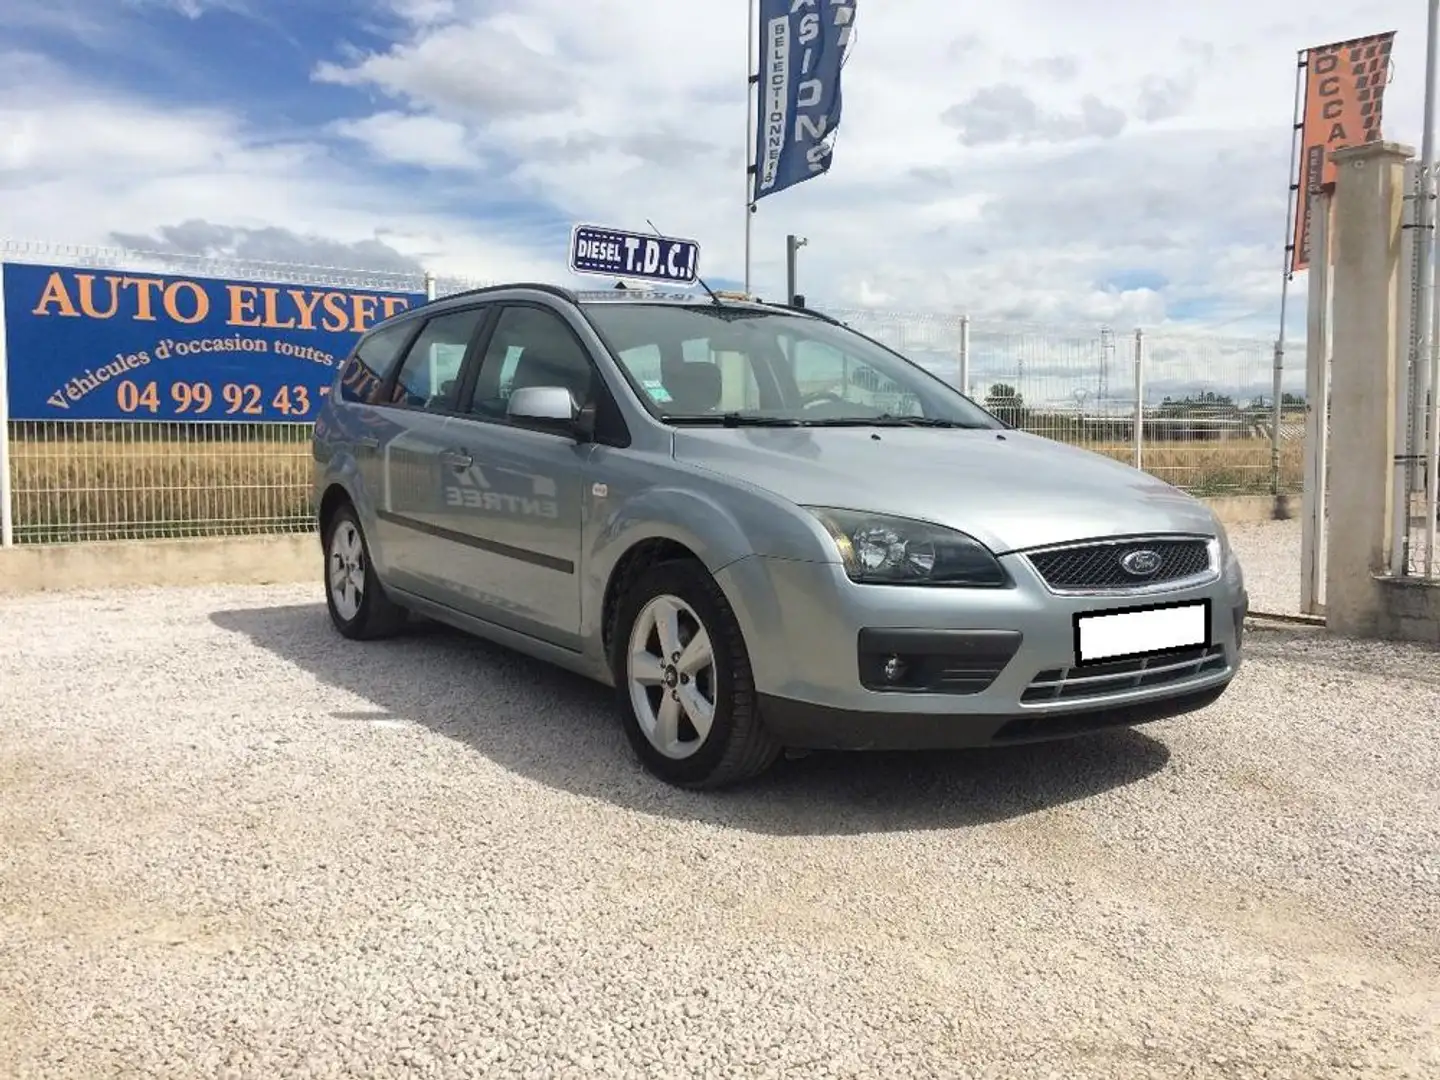 Ford Focus sw 1.6 tdci 110 trend - 1